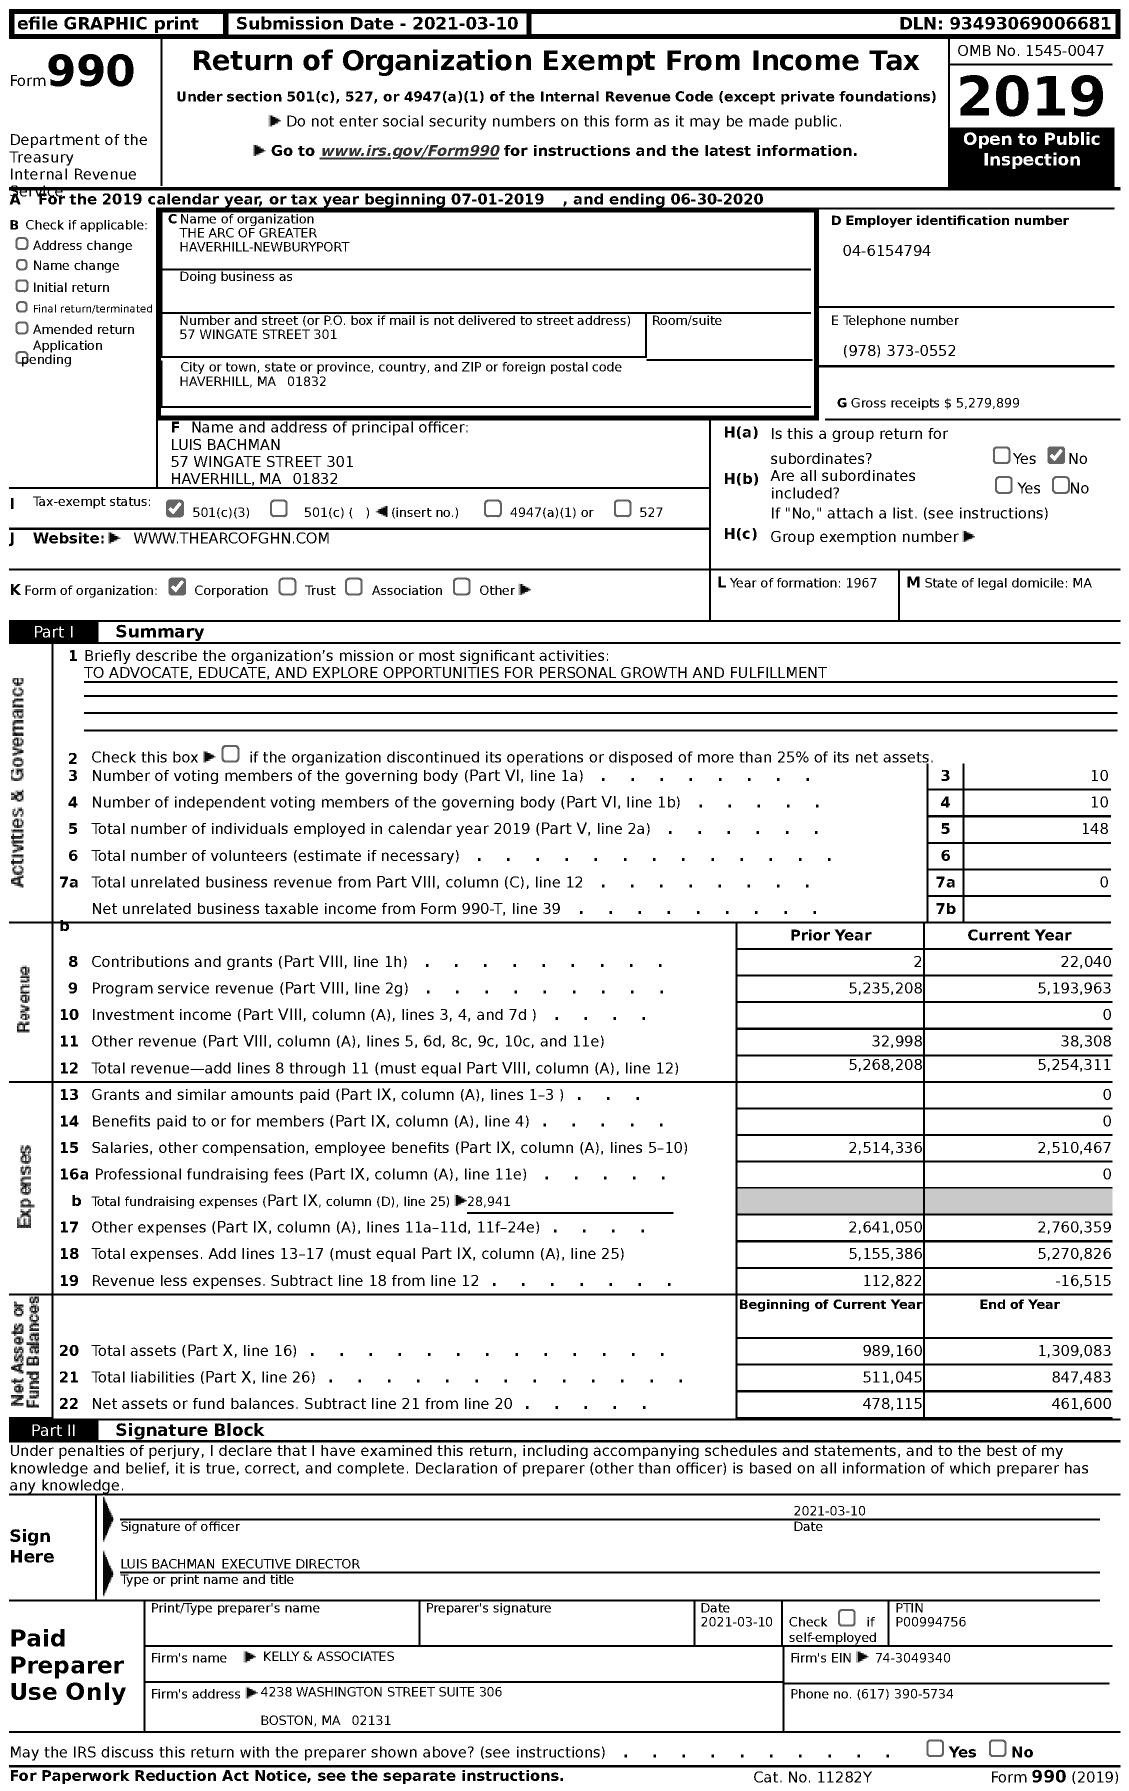 Image of first page of 2019 Form 990 for The Arc of Greater Haverhill-Newburyport